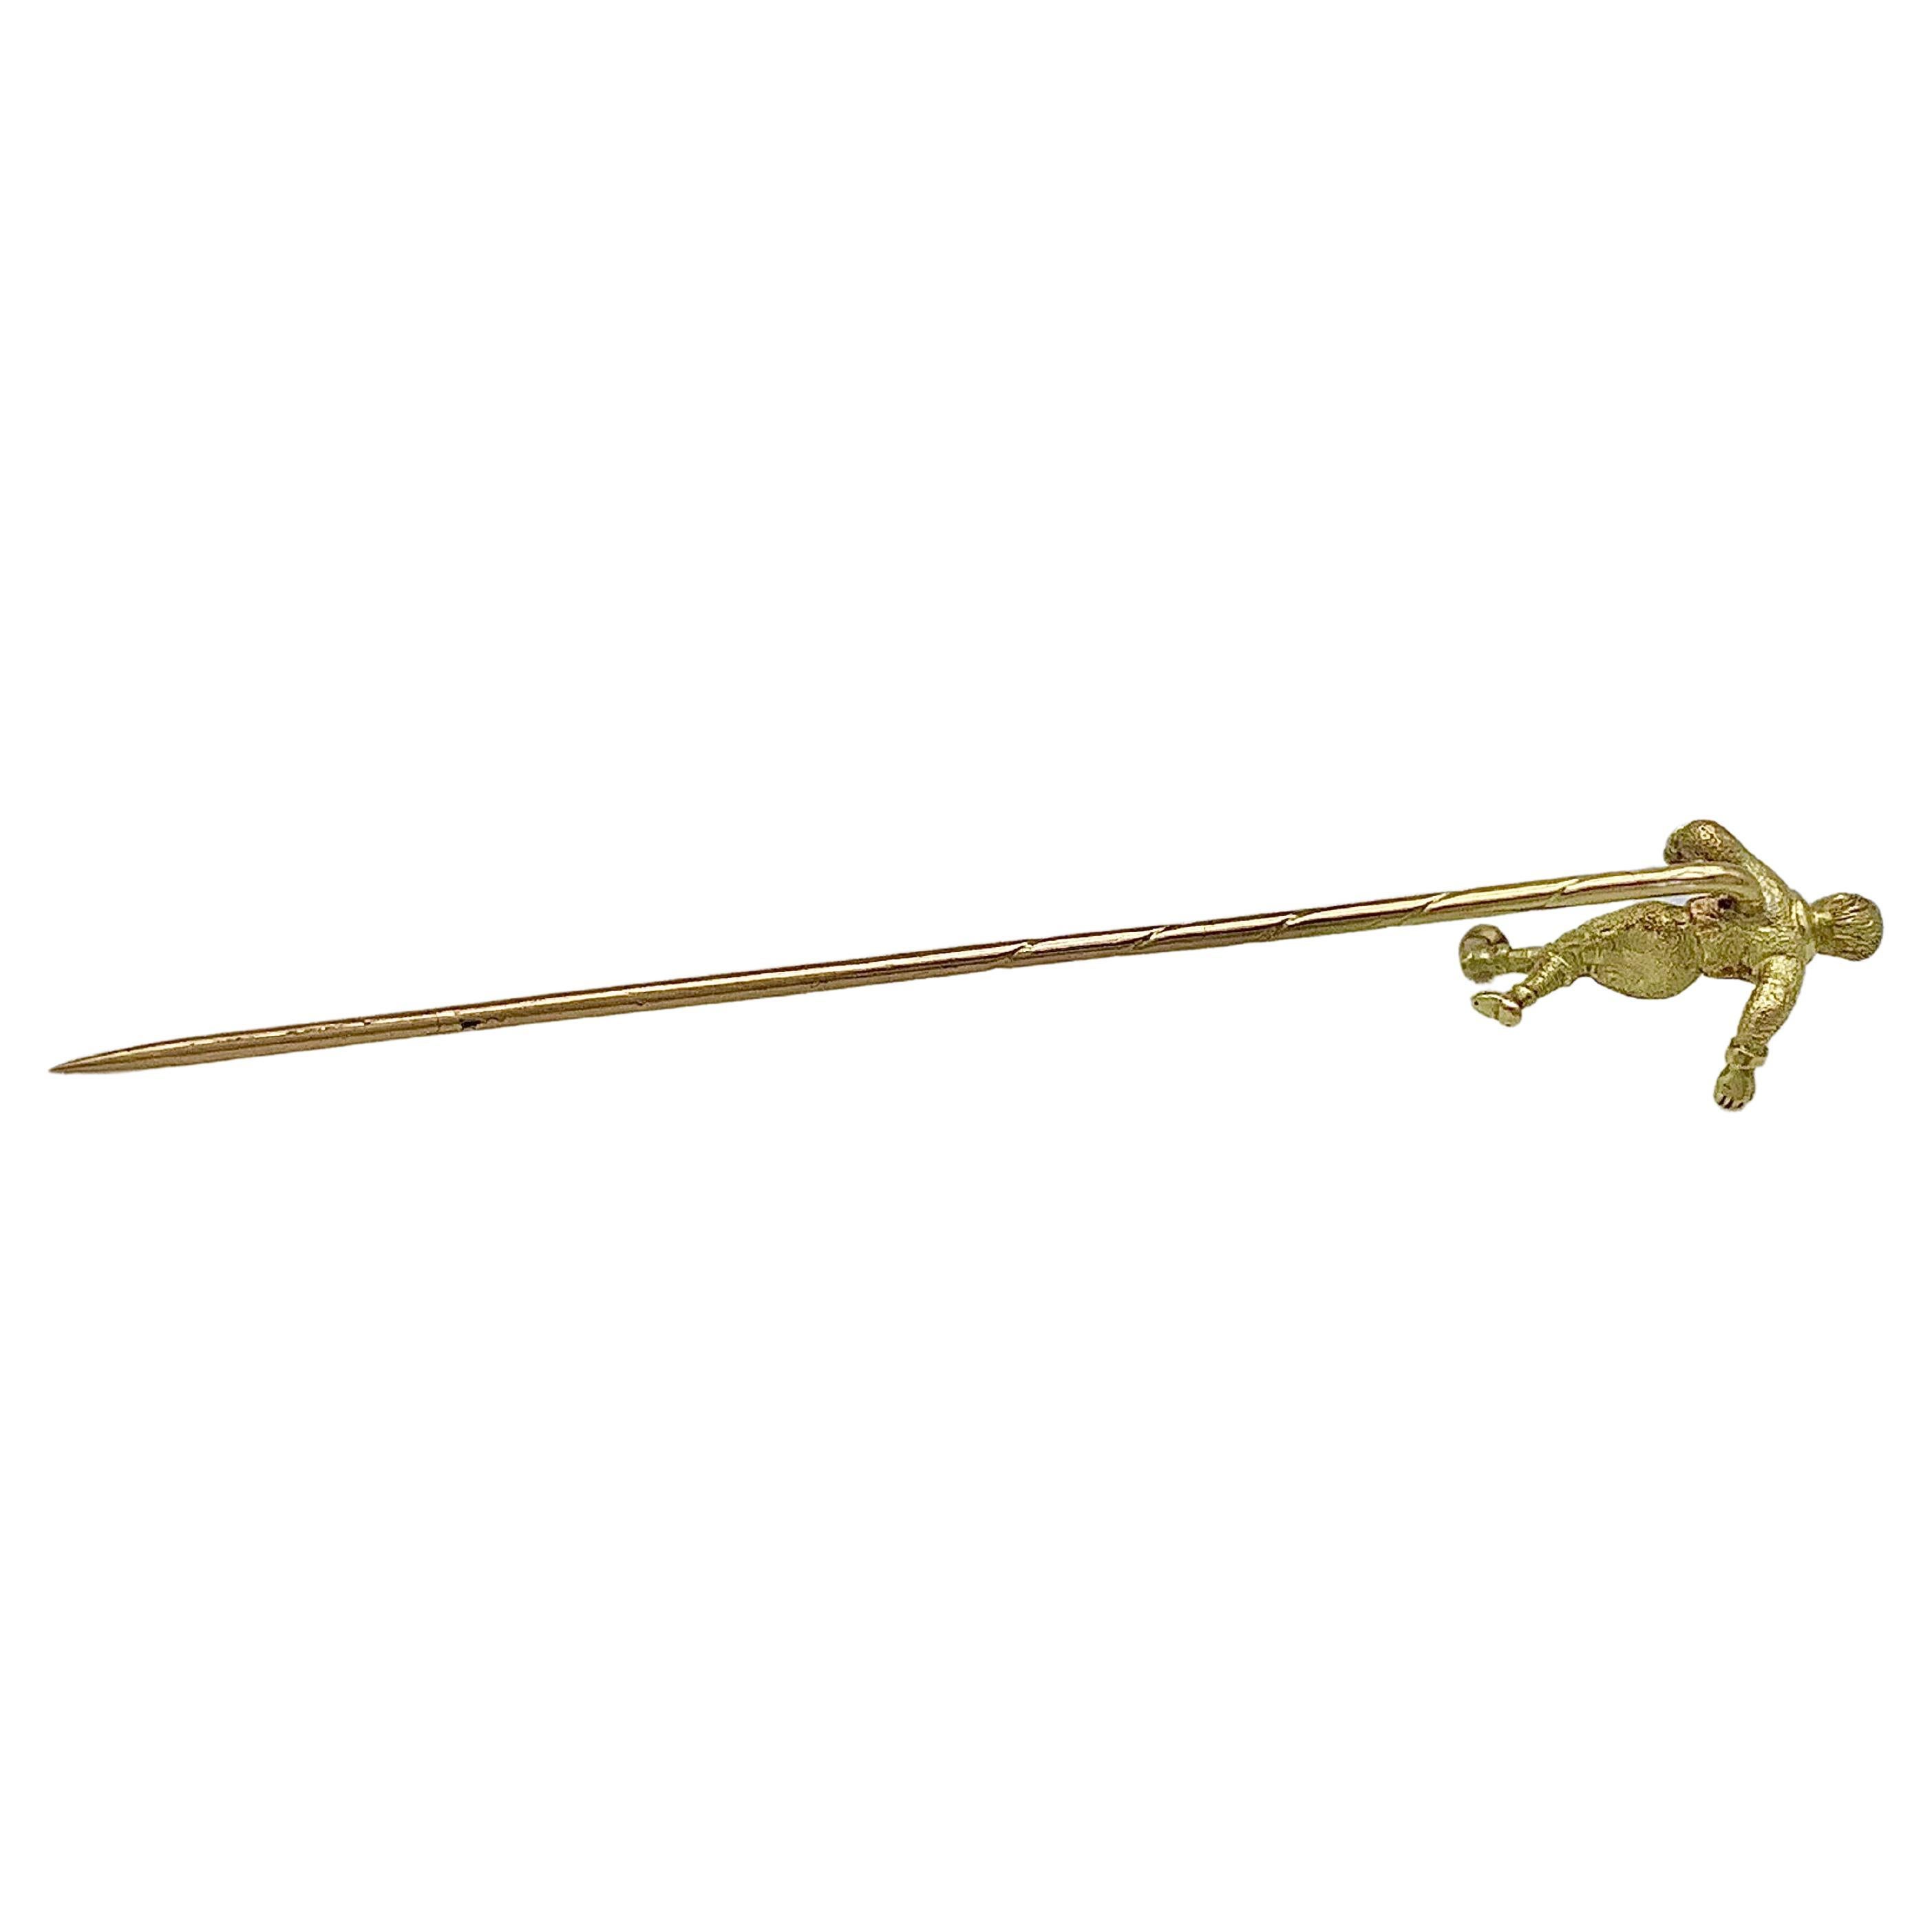 This charming stick pin of a football / soccer player has been crafted from 14 karat gold. The pin is impressed with the Austrian hallmark for 14 karat gold in use from 1901 - 1921. The sportsman wears a long sleeve shirt with collar, shorts, knee